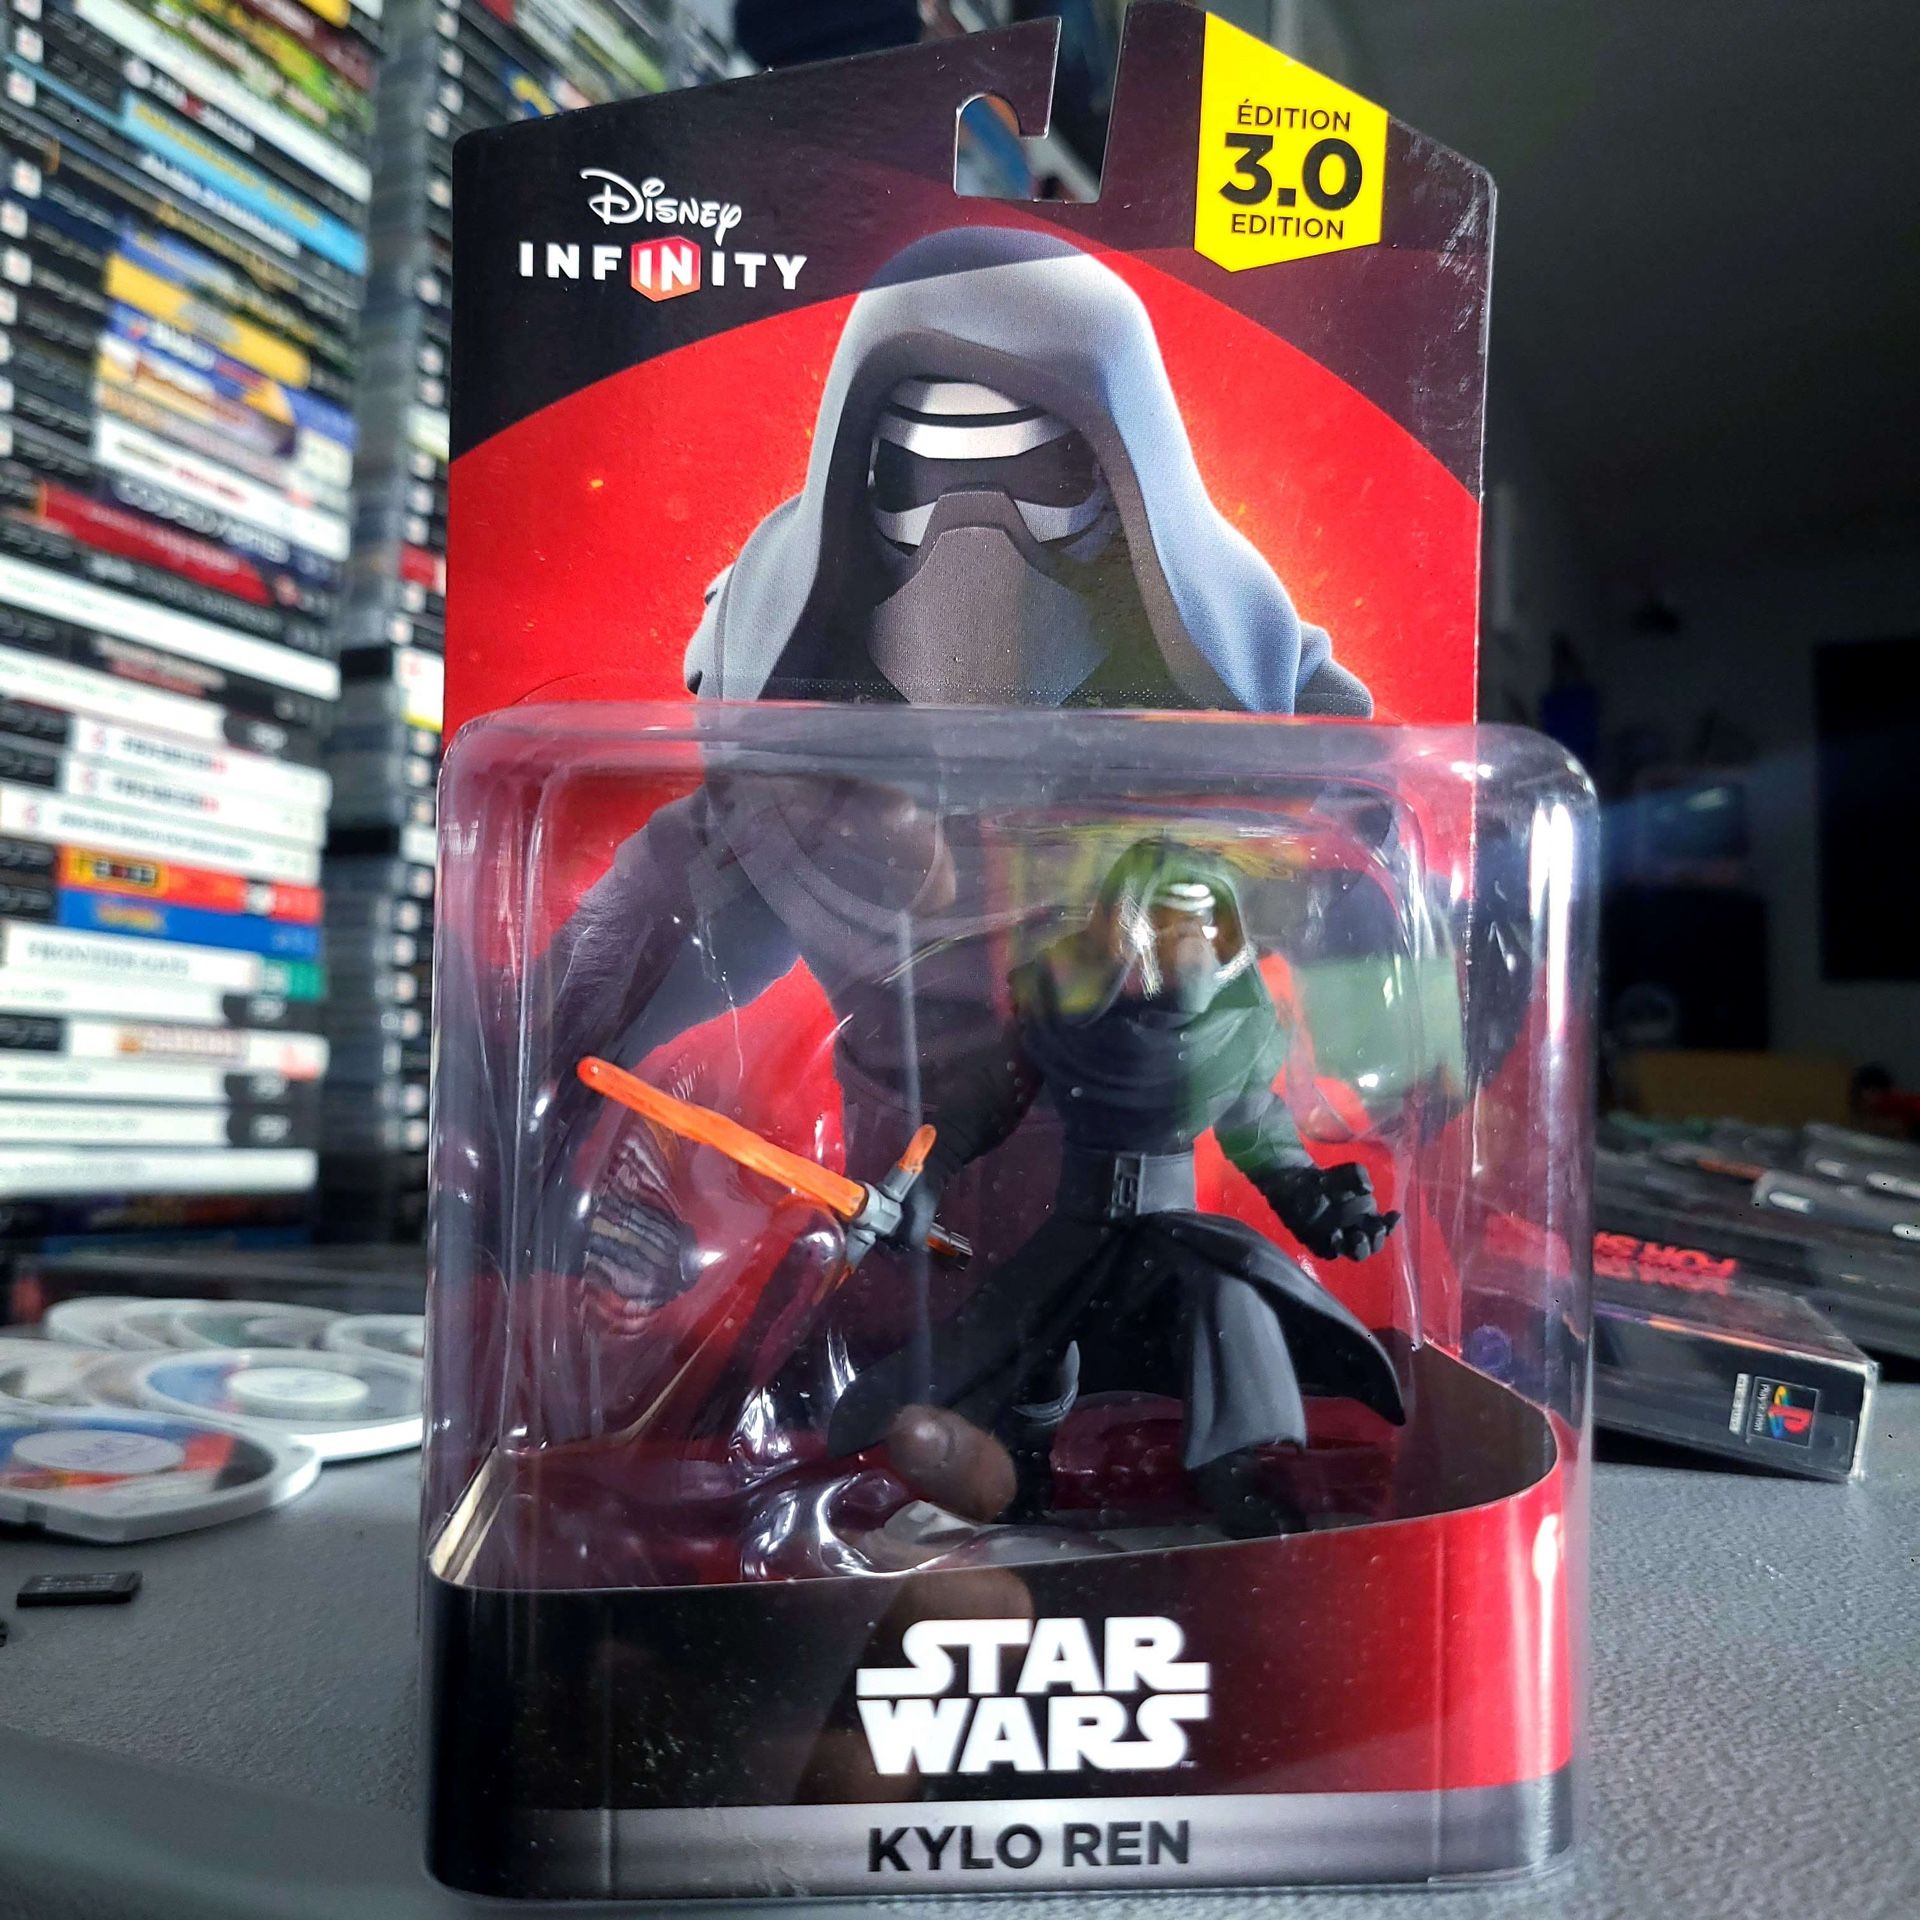 *NEW* Disney Infinity 3.0 Star Wars Kylo Ren Light FX Figure *TRADE IN YOUR OLD GAMES FOR CSH OR CREDIT HERE/WE FIX SYSTEMS*